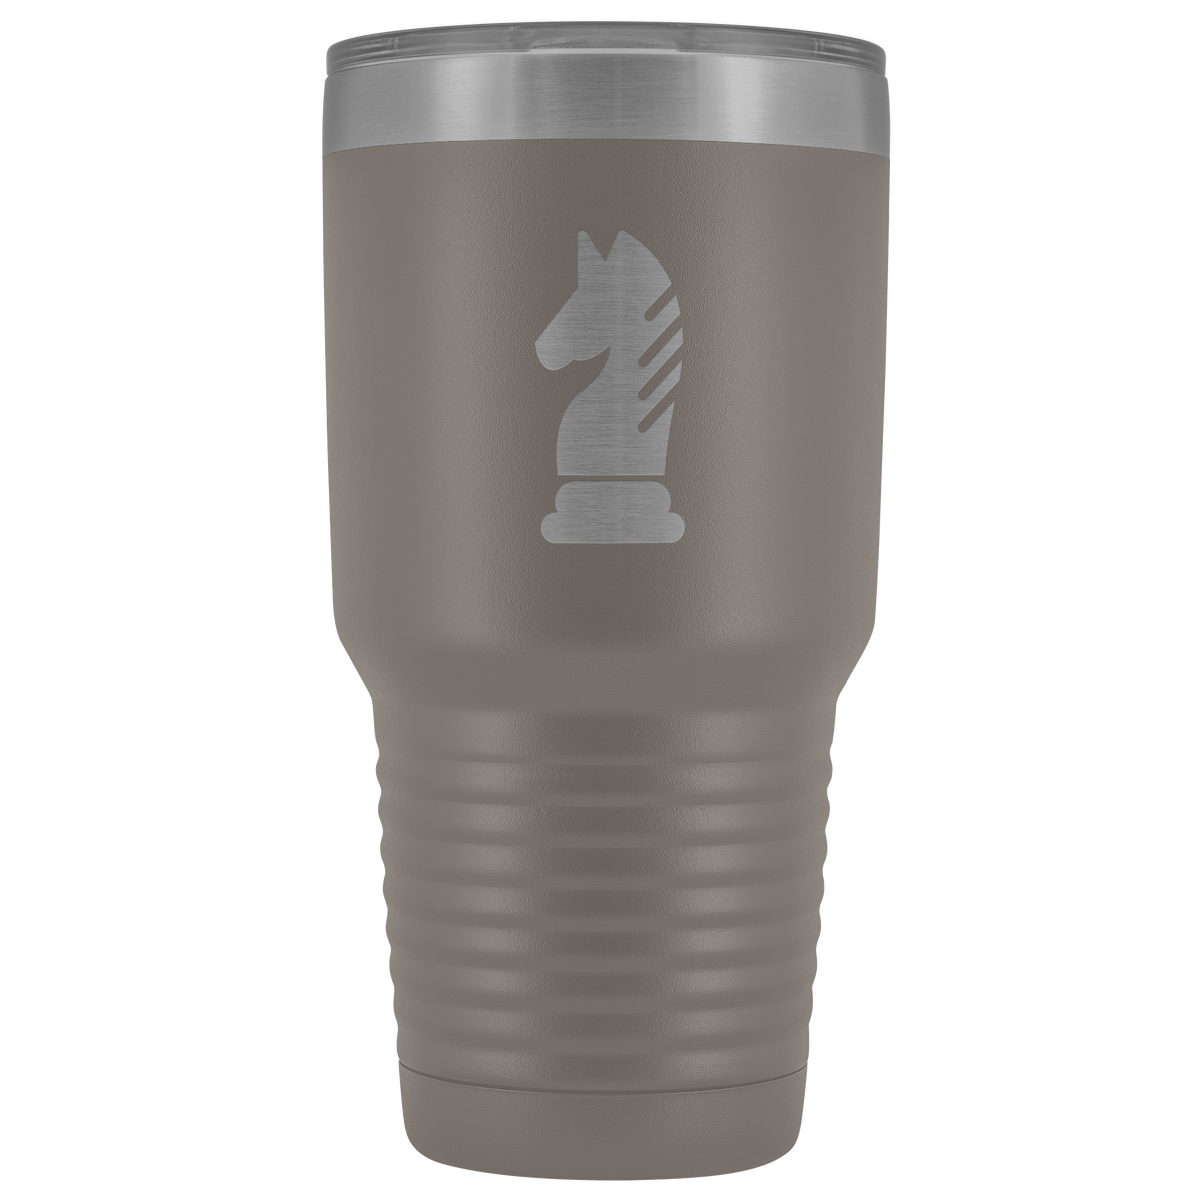 Laser etched Knight 30 Ounce stainless steel Vacuum insulated hot and cold beverage Tumbler